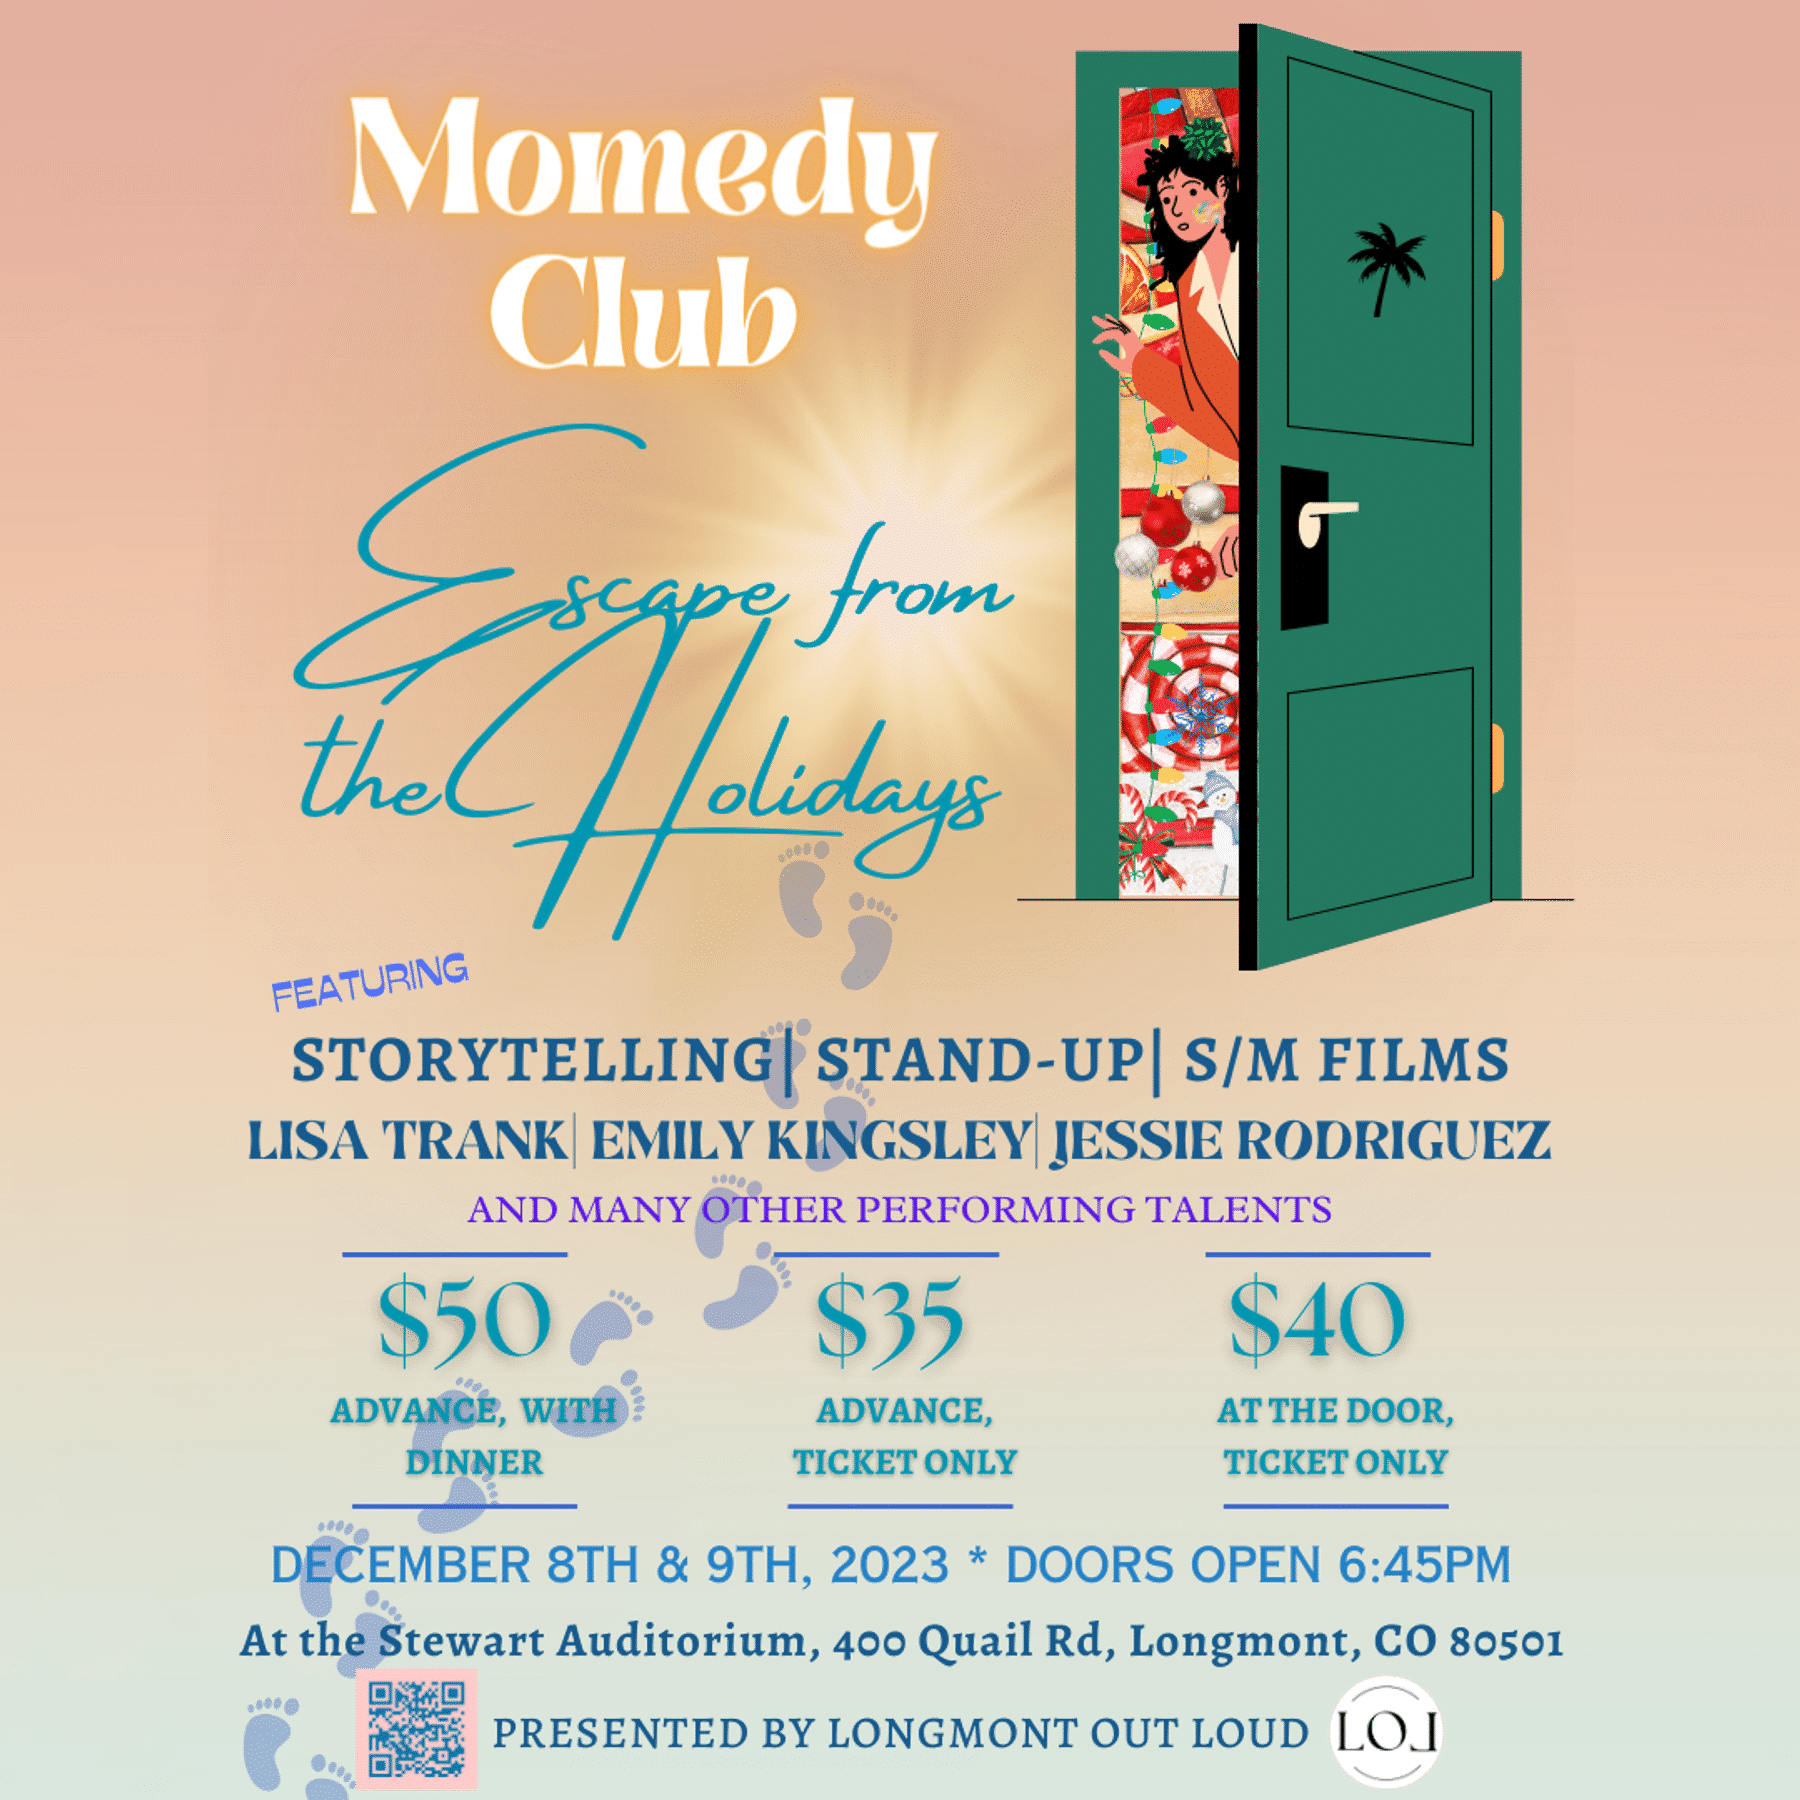 The Momedy Club: Escape from the Holidays